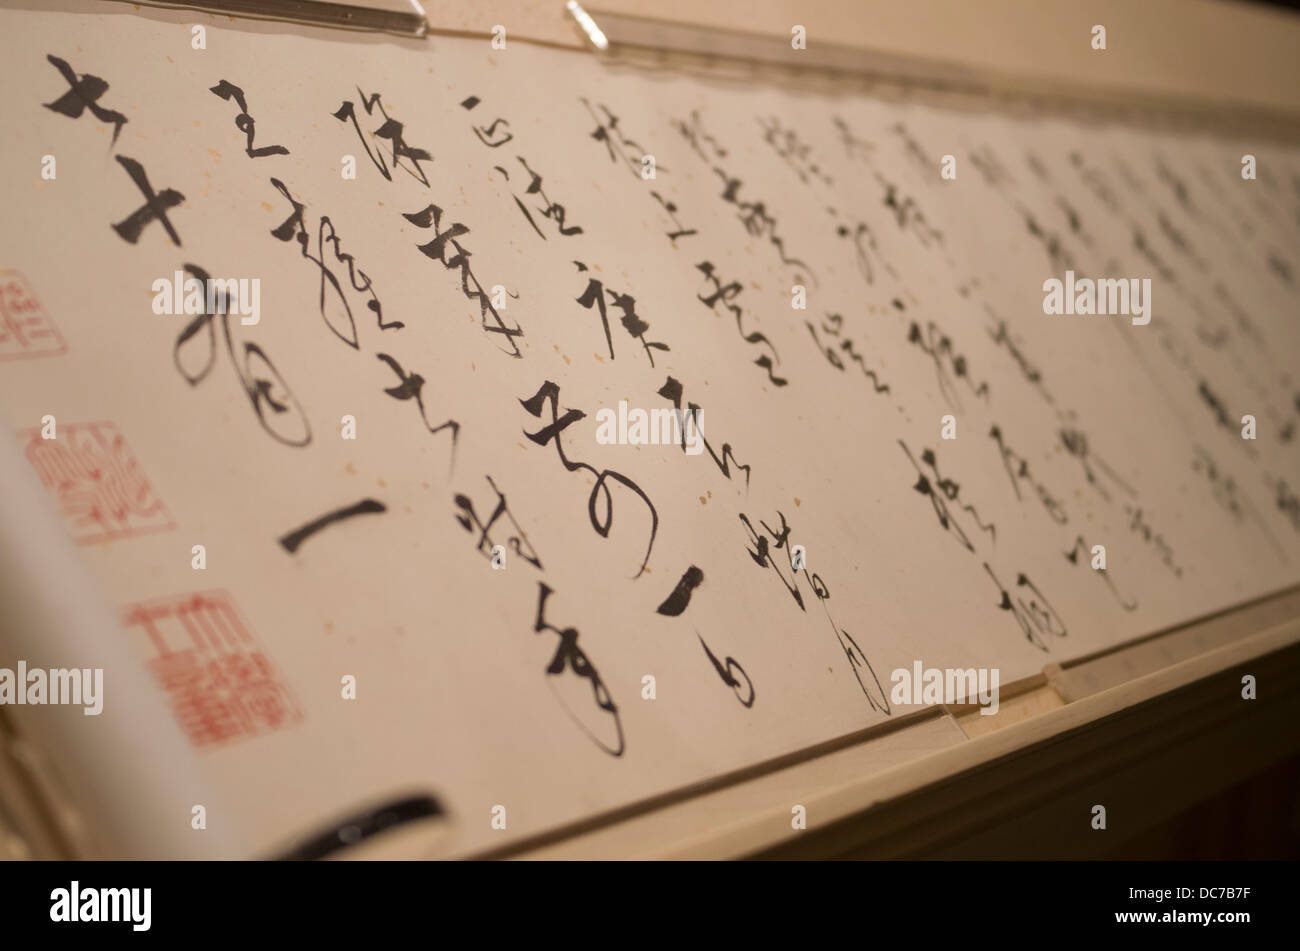 Scroll with Calligraphy, Shanghai Museum, Shanghai, China Stock Photo